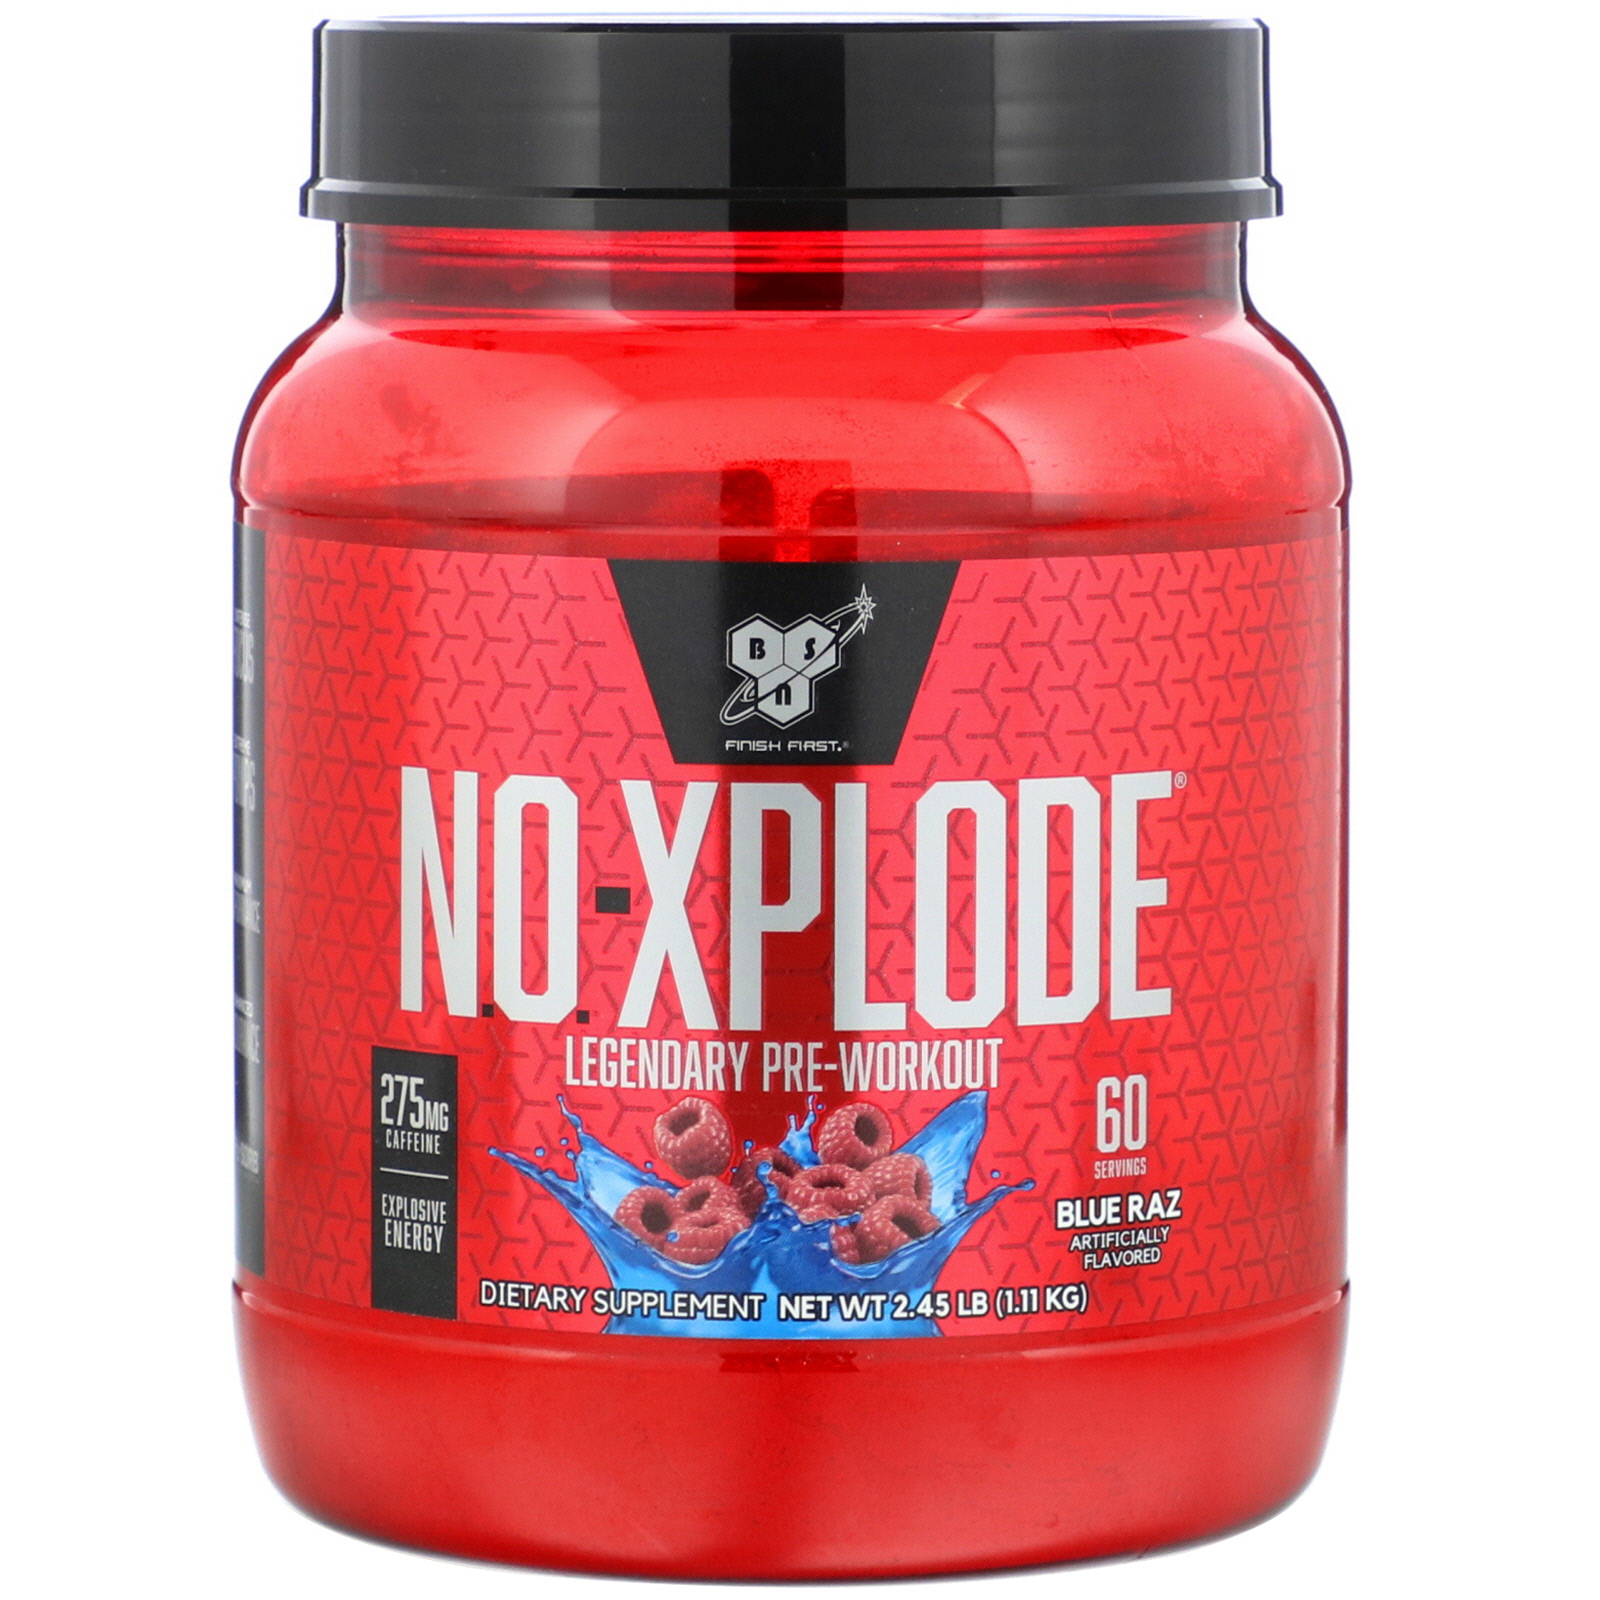 5 Day No xplode legendary pre workout review for Burn Fat fast